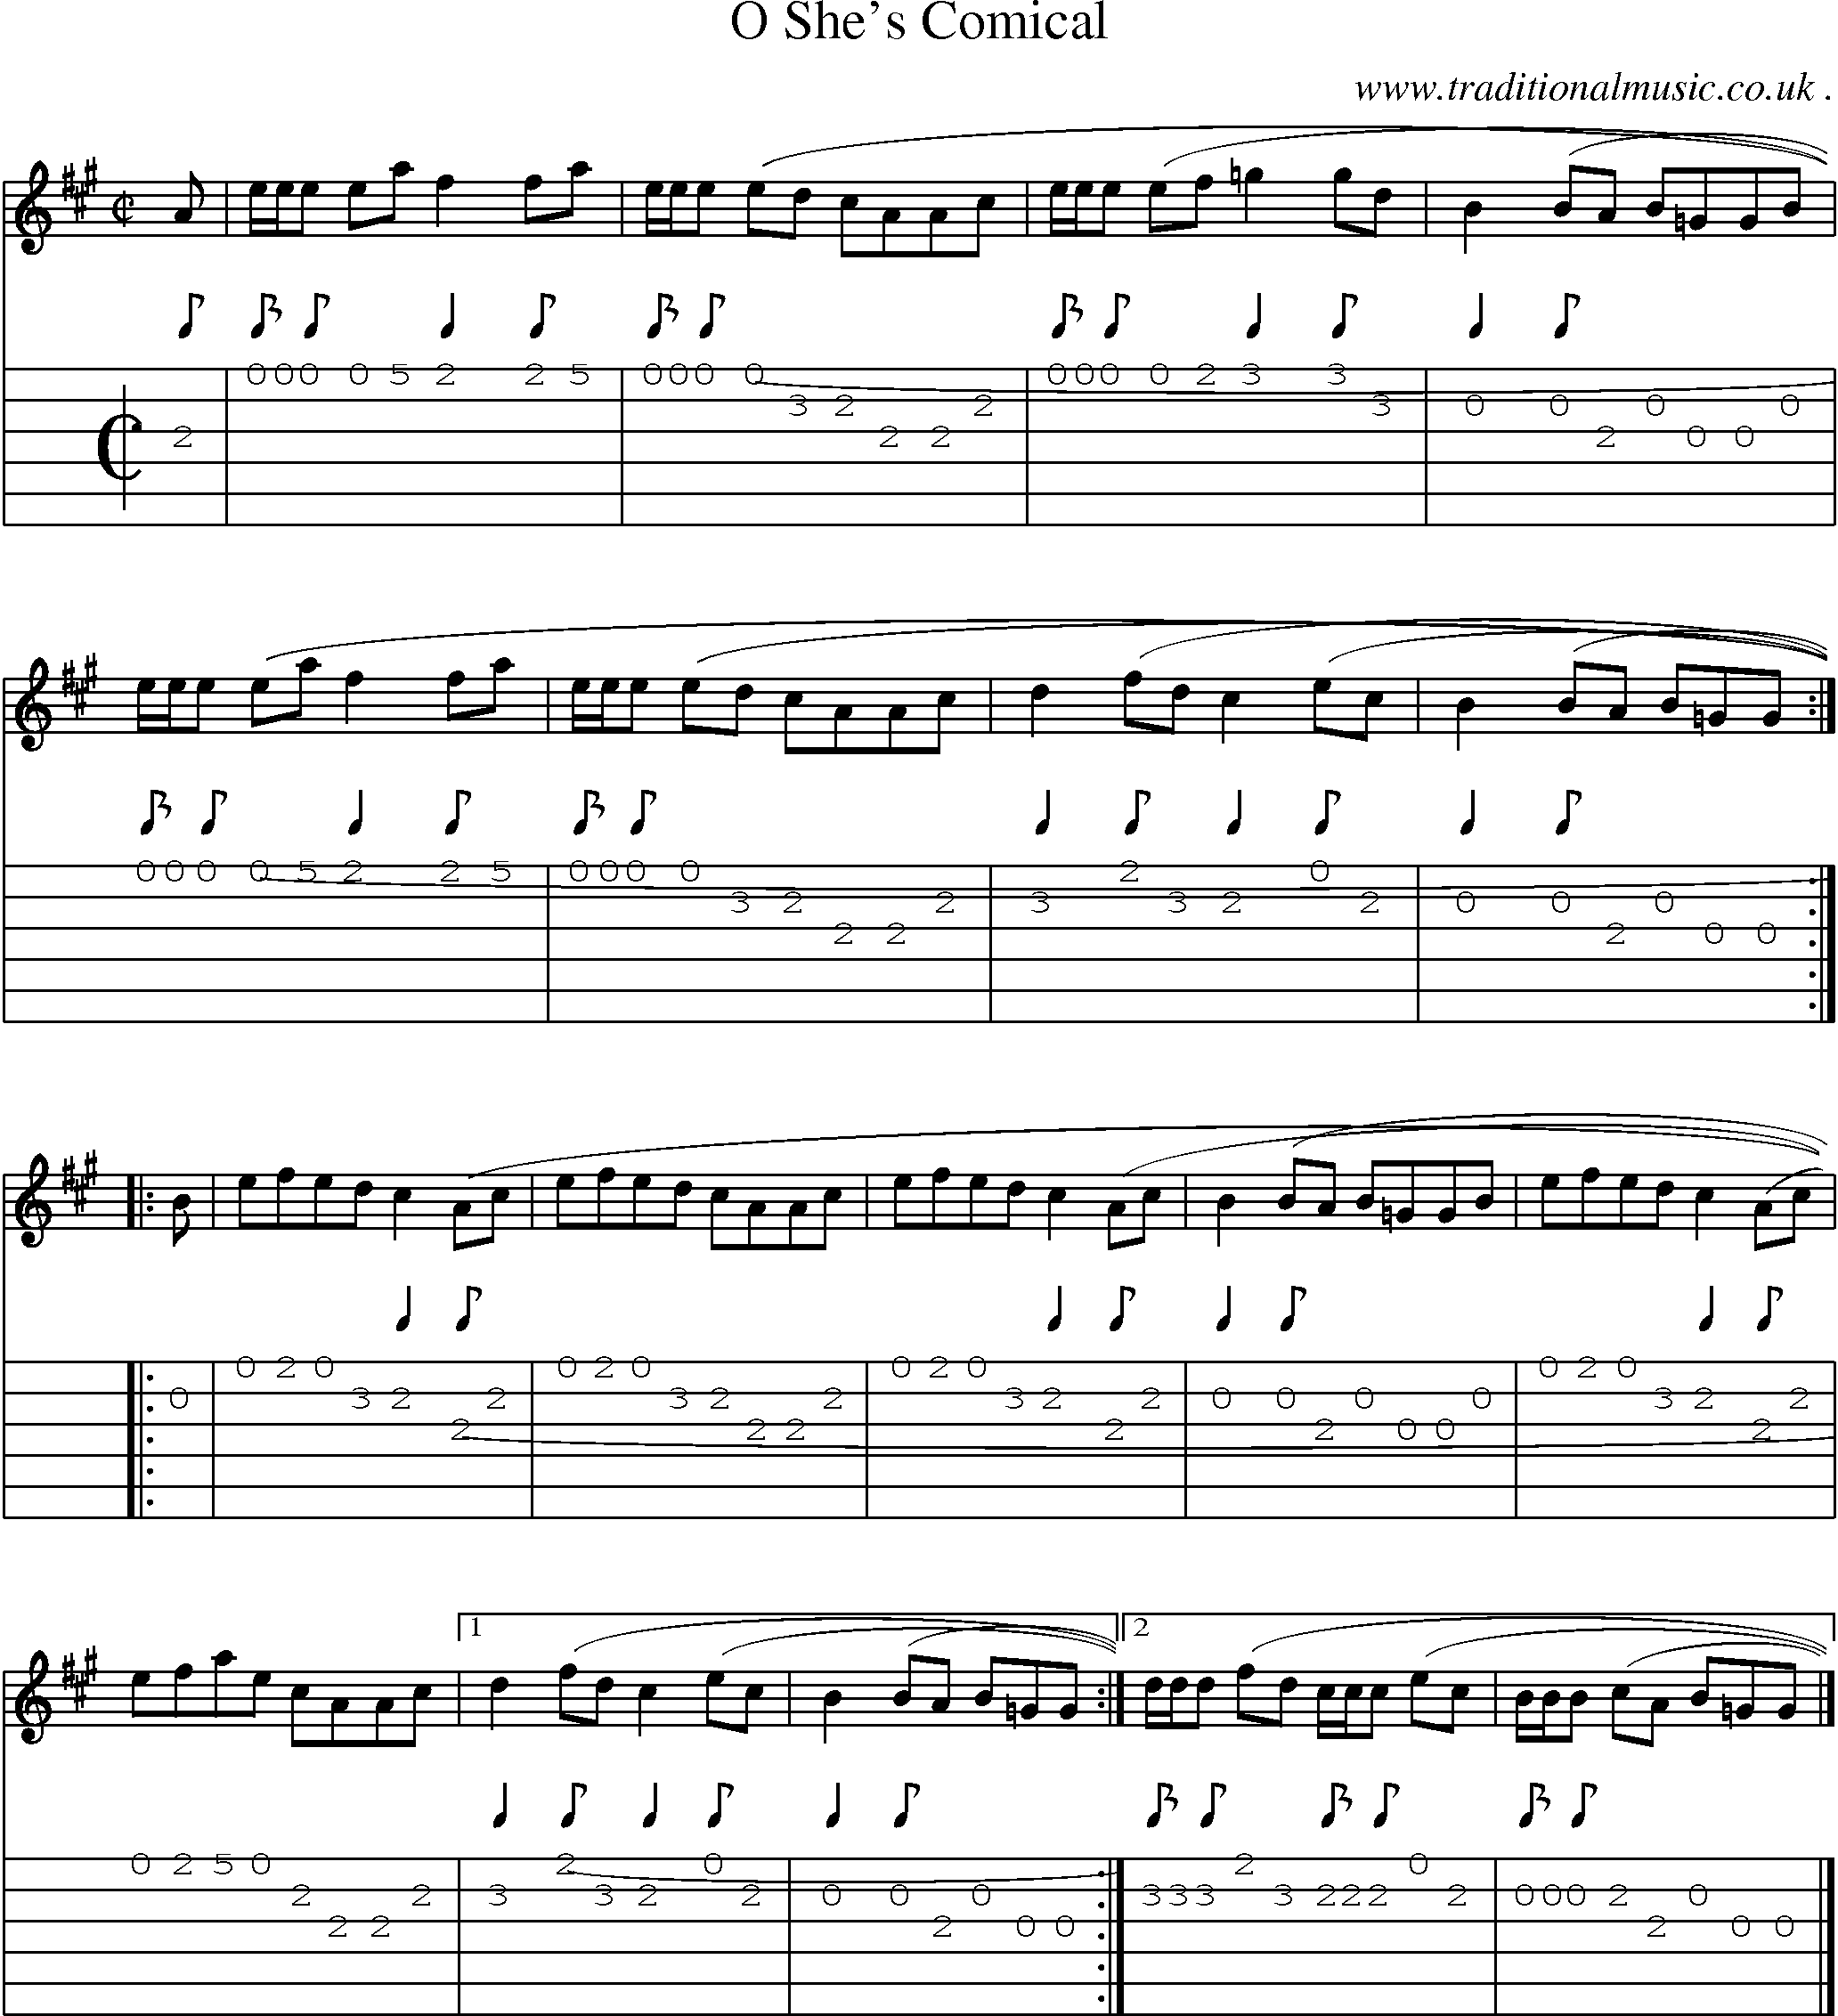 Sheet-music  score, Chords and Guitar Tabs for O Shes Comical